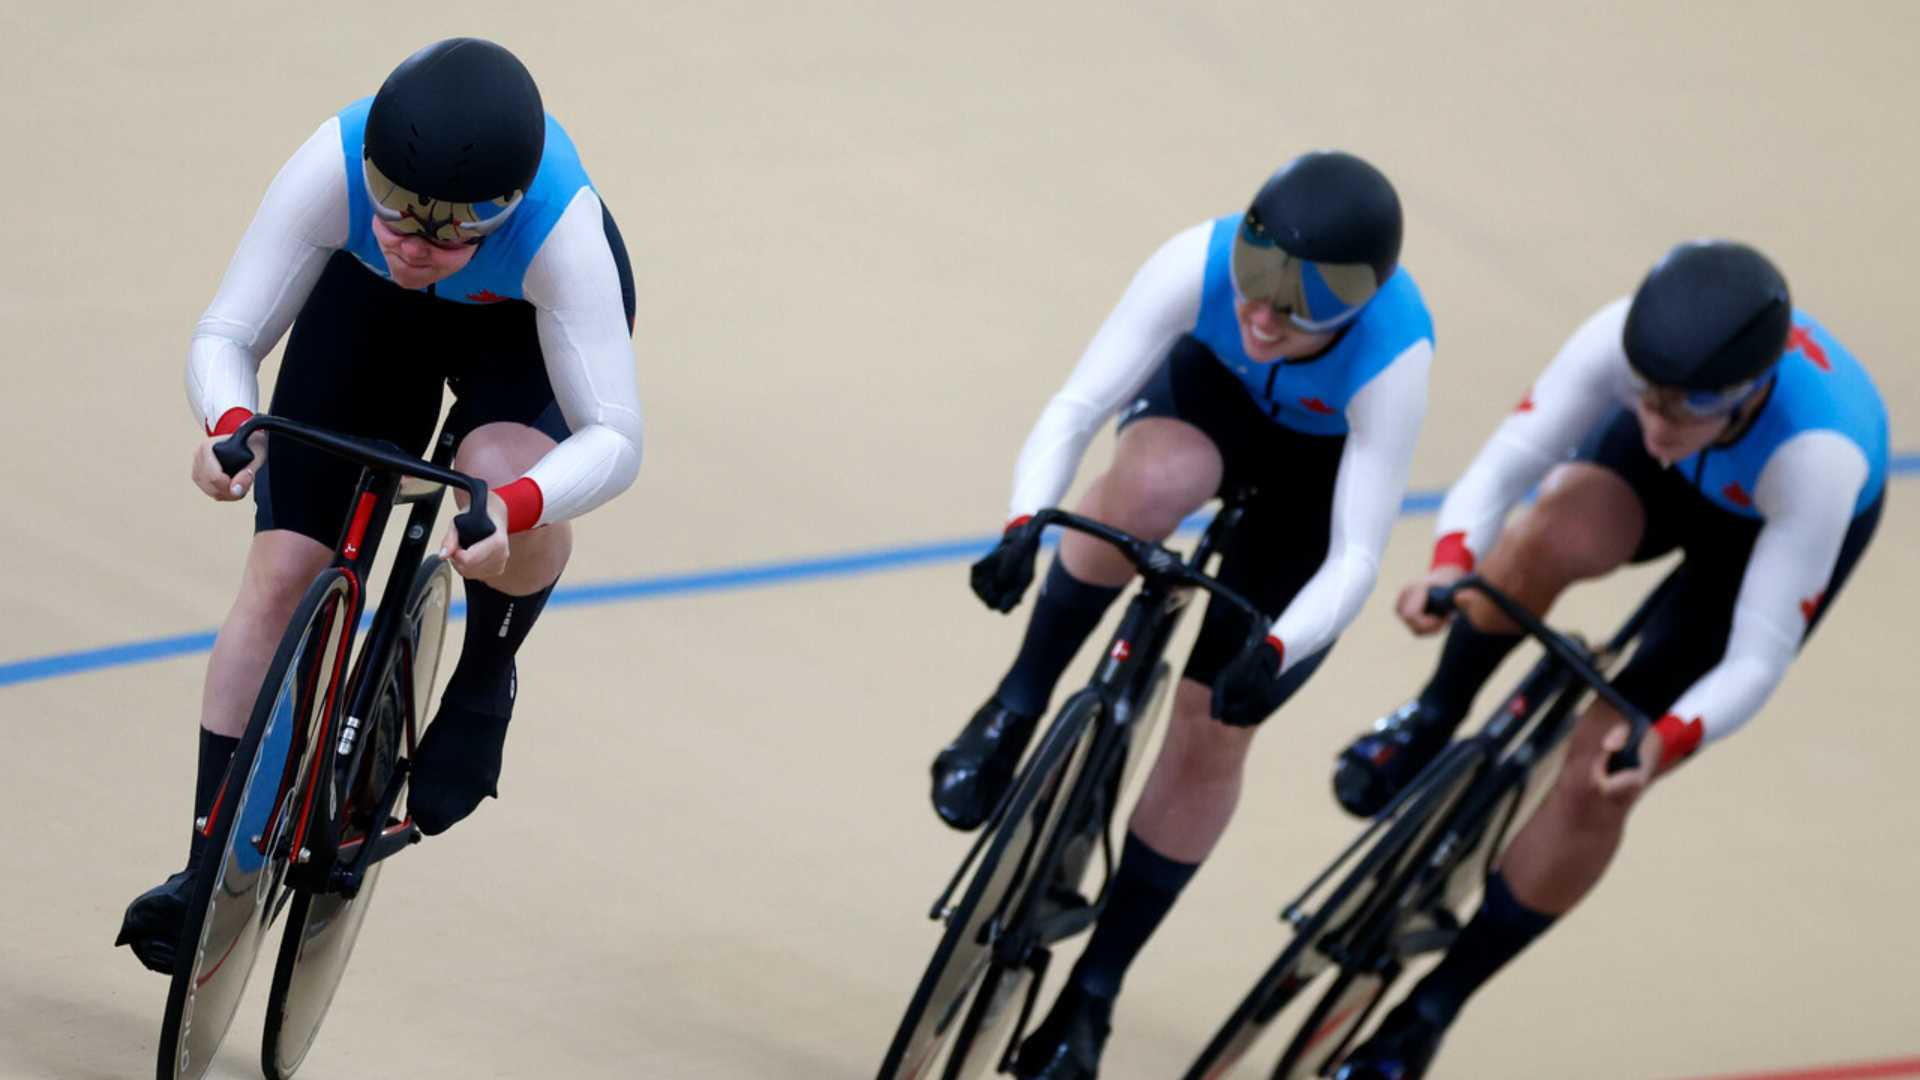 Canada takes gold in female’s team pursuit in cycling